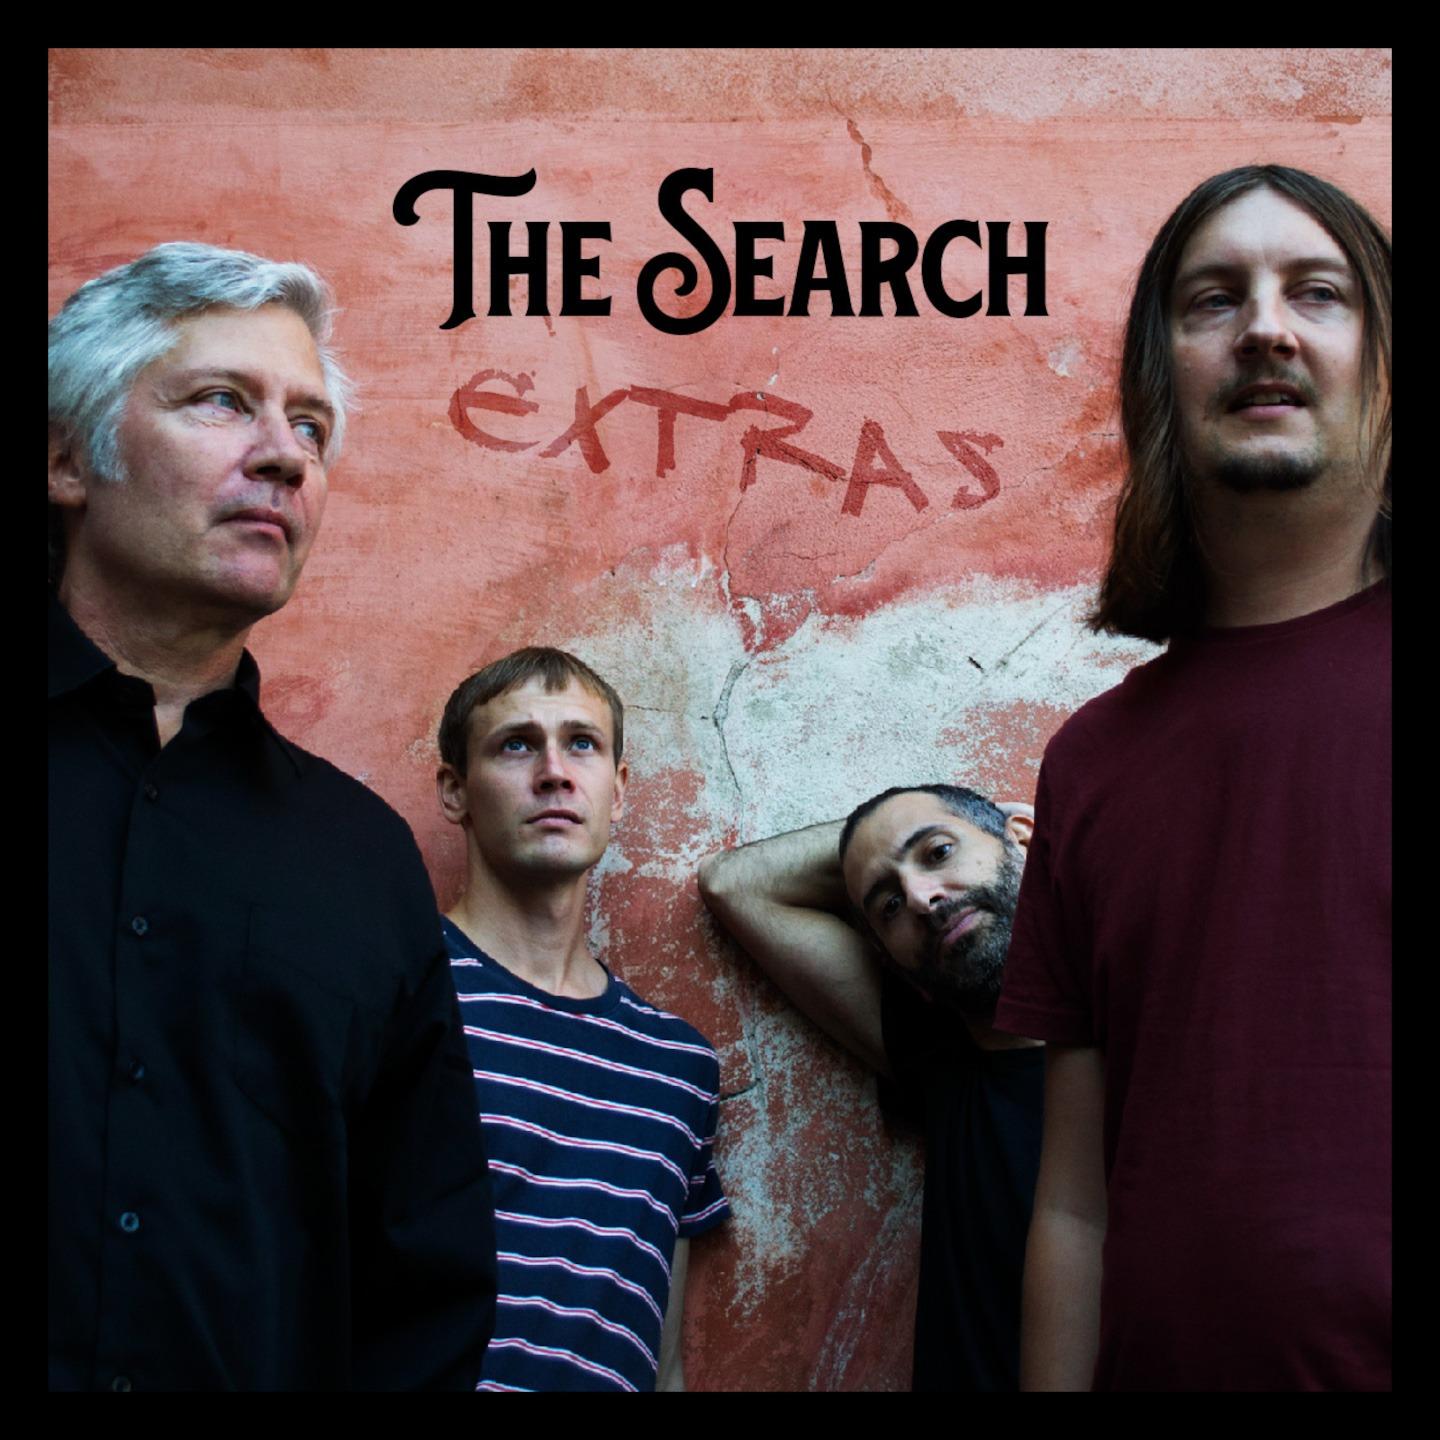 The Search Intensifies mood with their great new album “Extras” 2022!